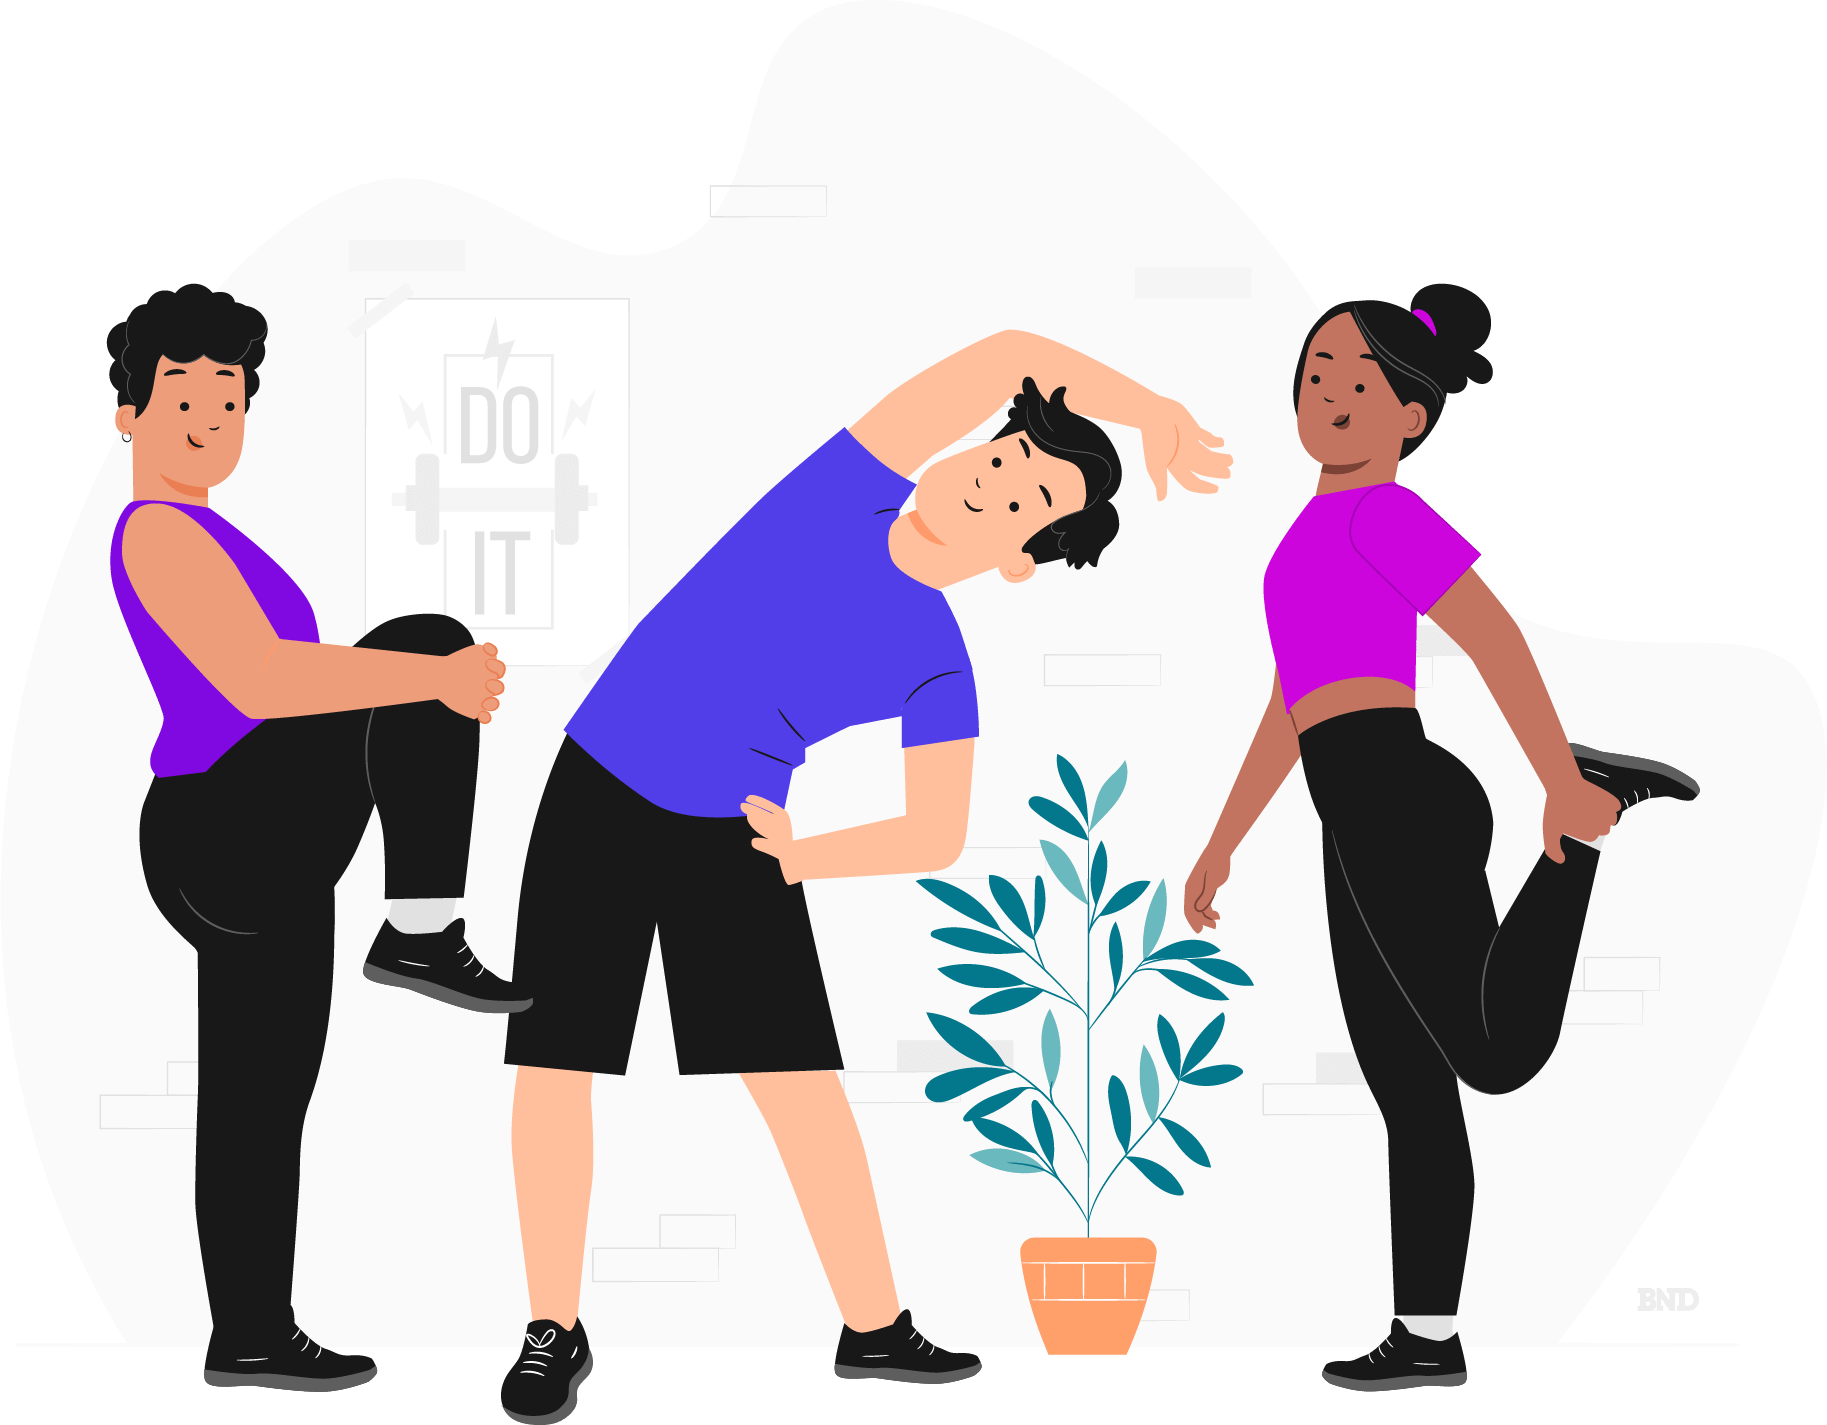 graphic of people in workout attire doing stretches